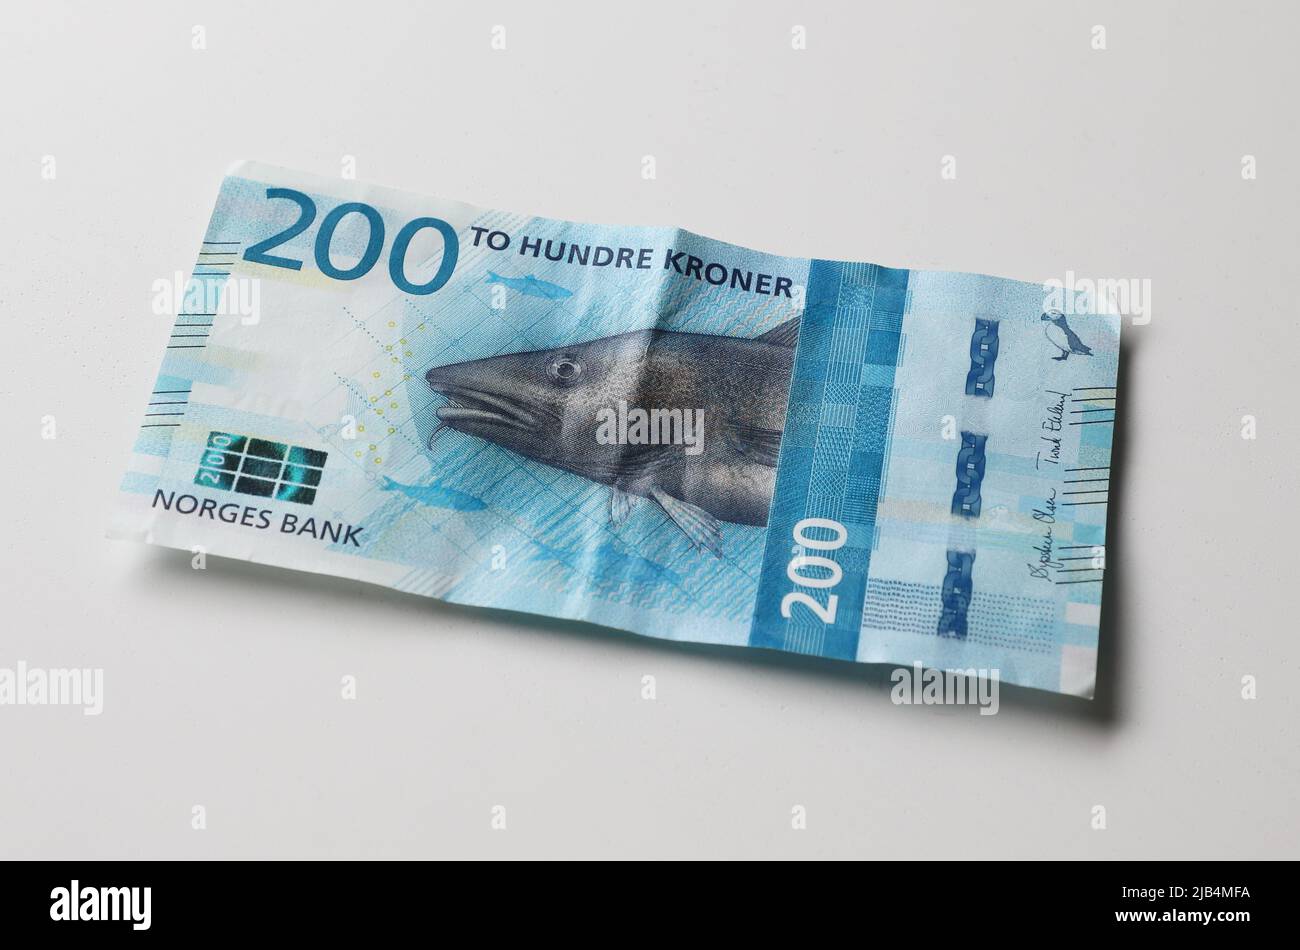 Trondheim, Norway - May 26, 2022: High angle view of a 2017 edition 200 krona used Norwegian banknote on a grey surface. Stock Photo